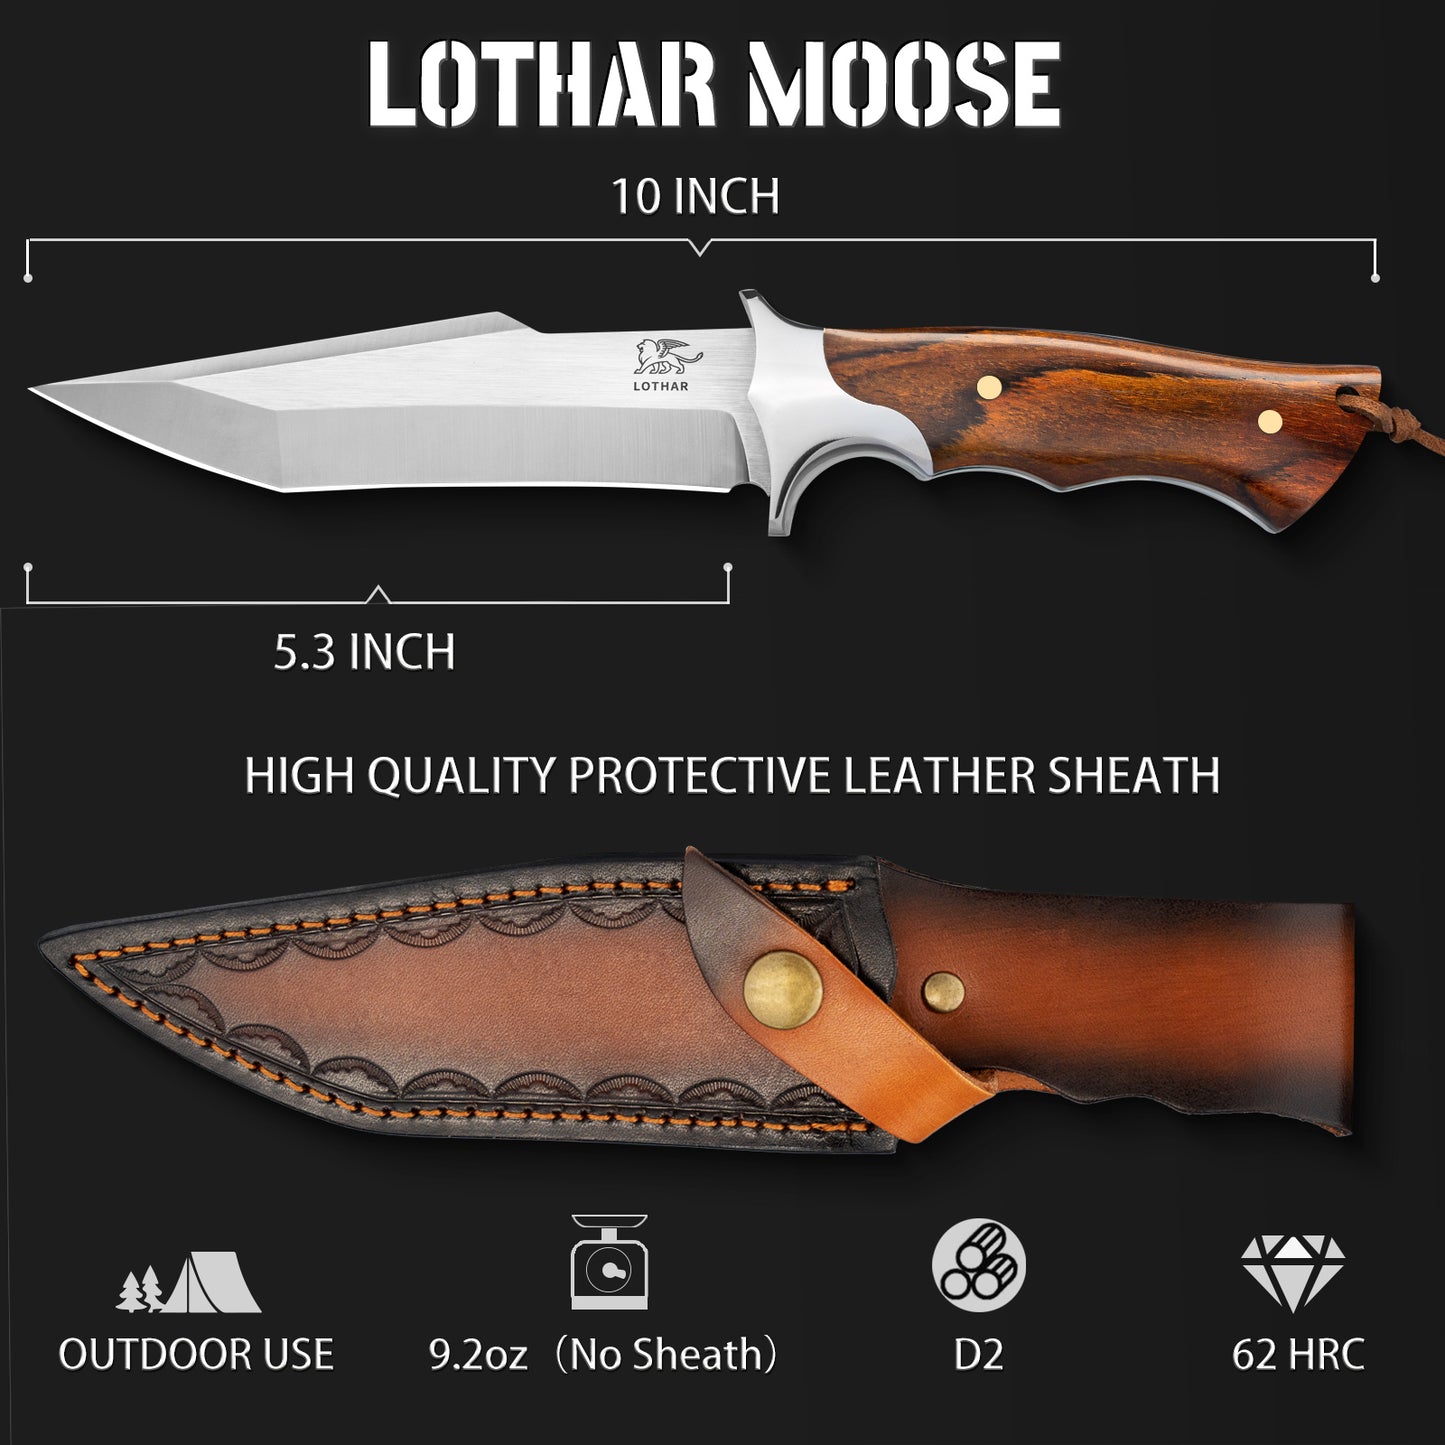 LOTHAR MOOSE Fixed Blade Hunting Knife, 5.3 Inch Sharp D2 Blade Bowie Knife with Leather Sheath, Rosewood Handle, Perfect Helper for Hunting, Camping or Bushcraft